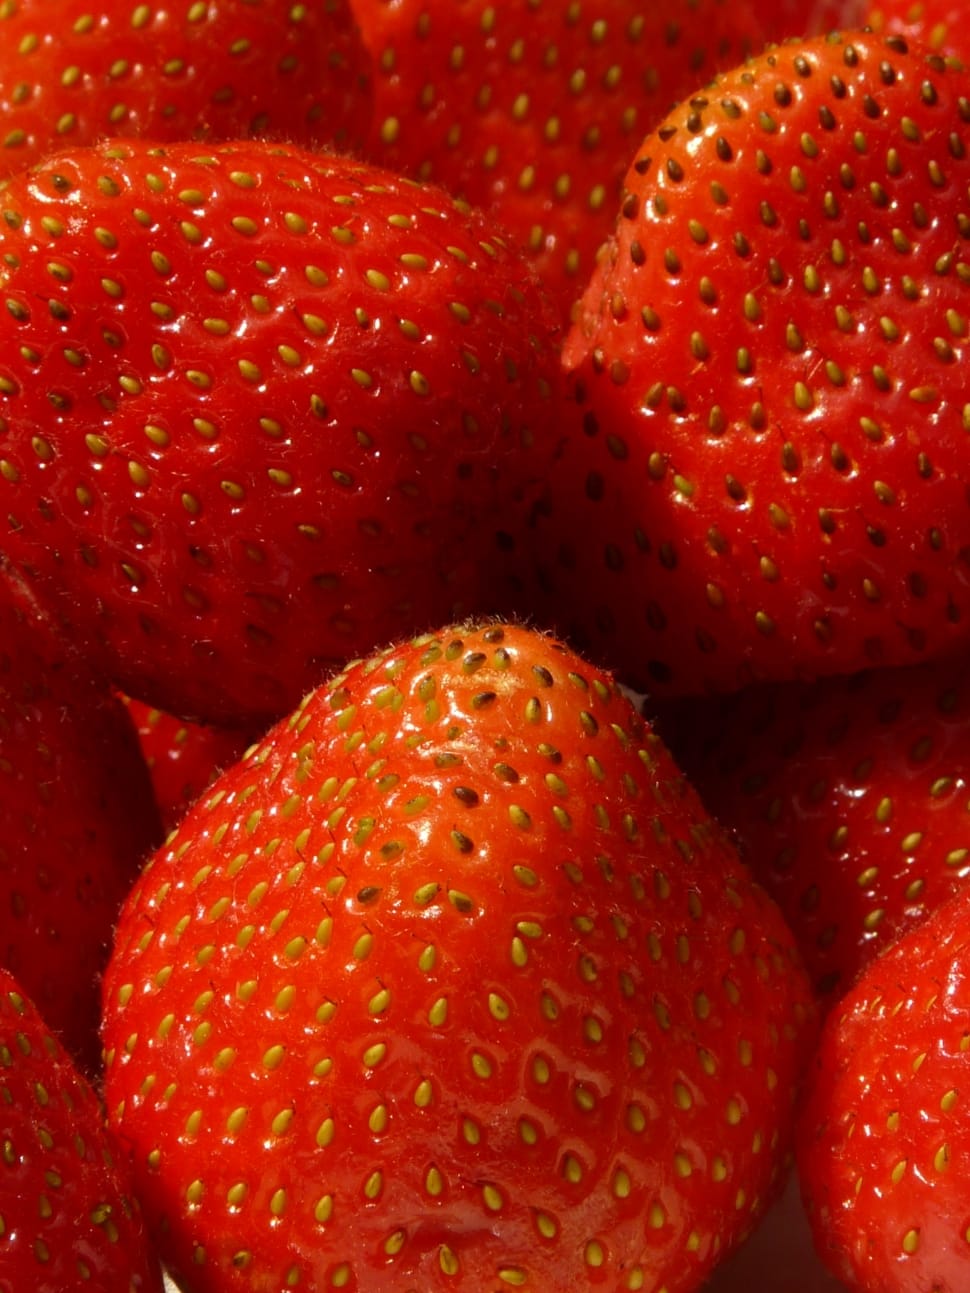 strawberries preview